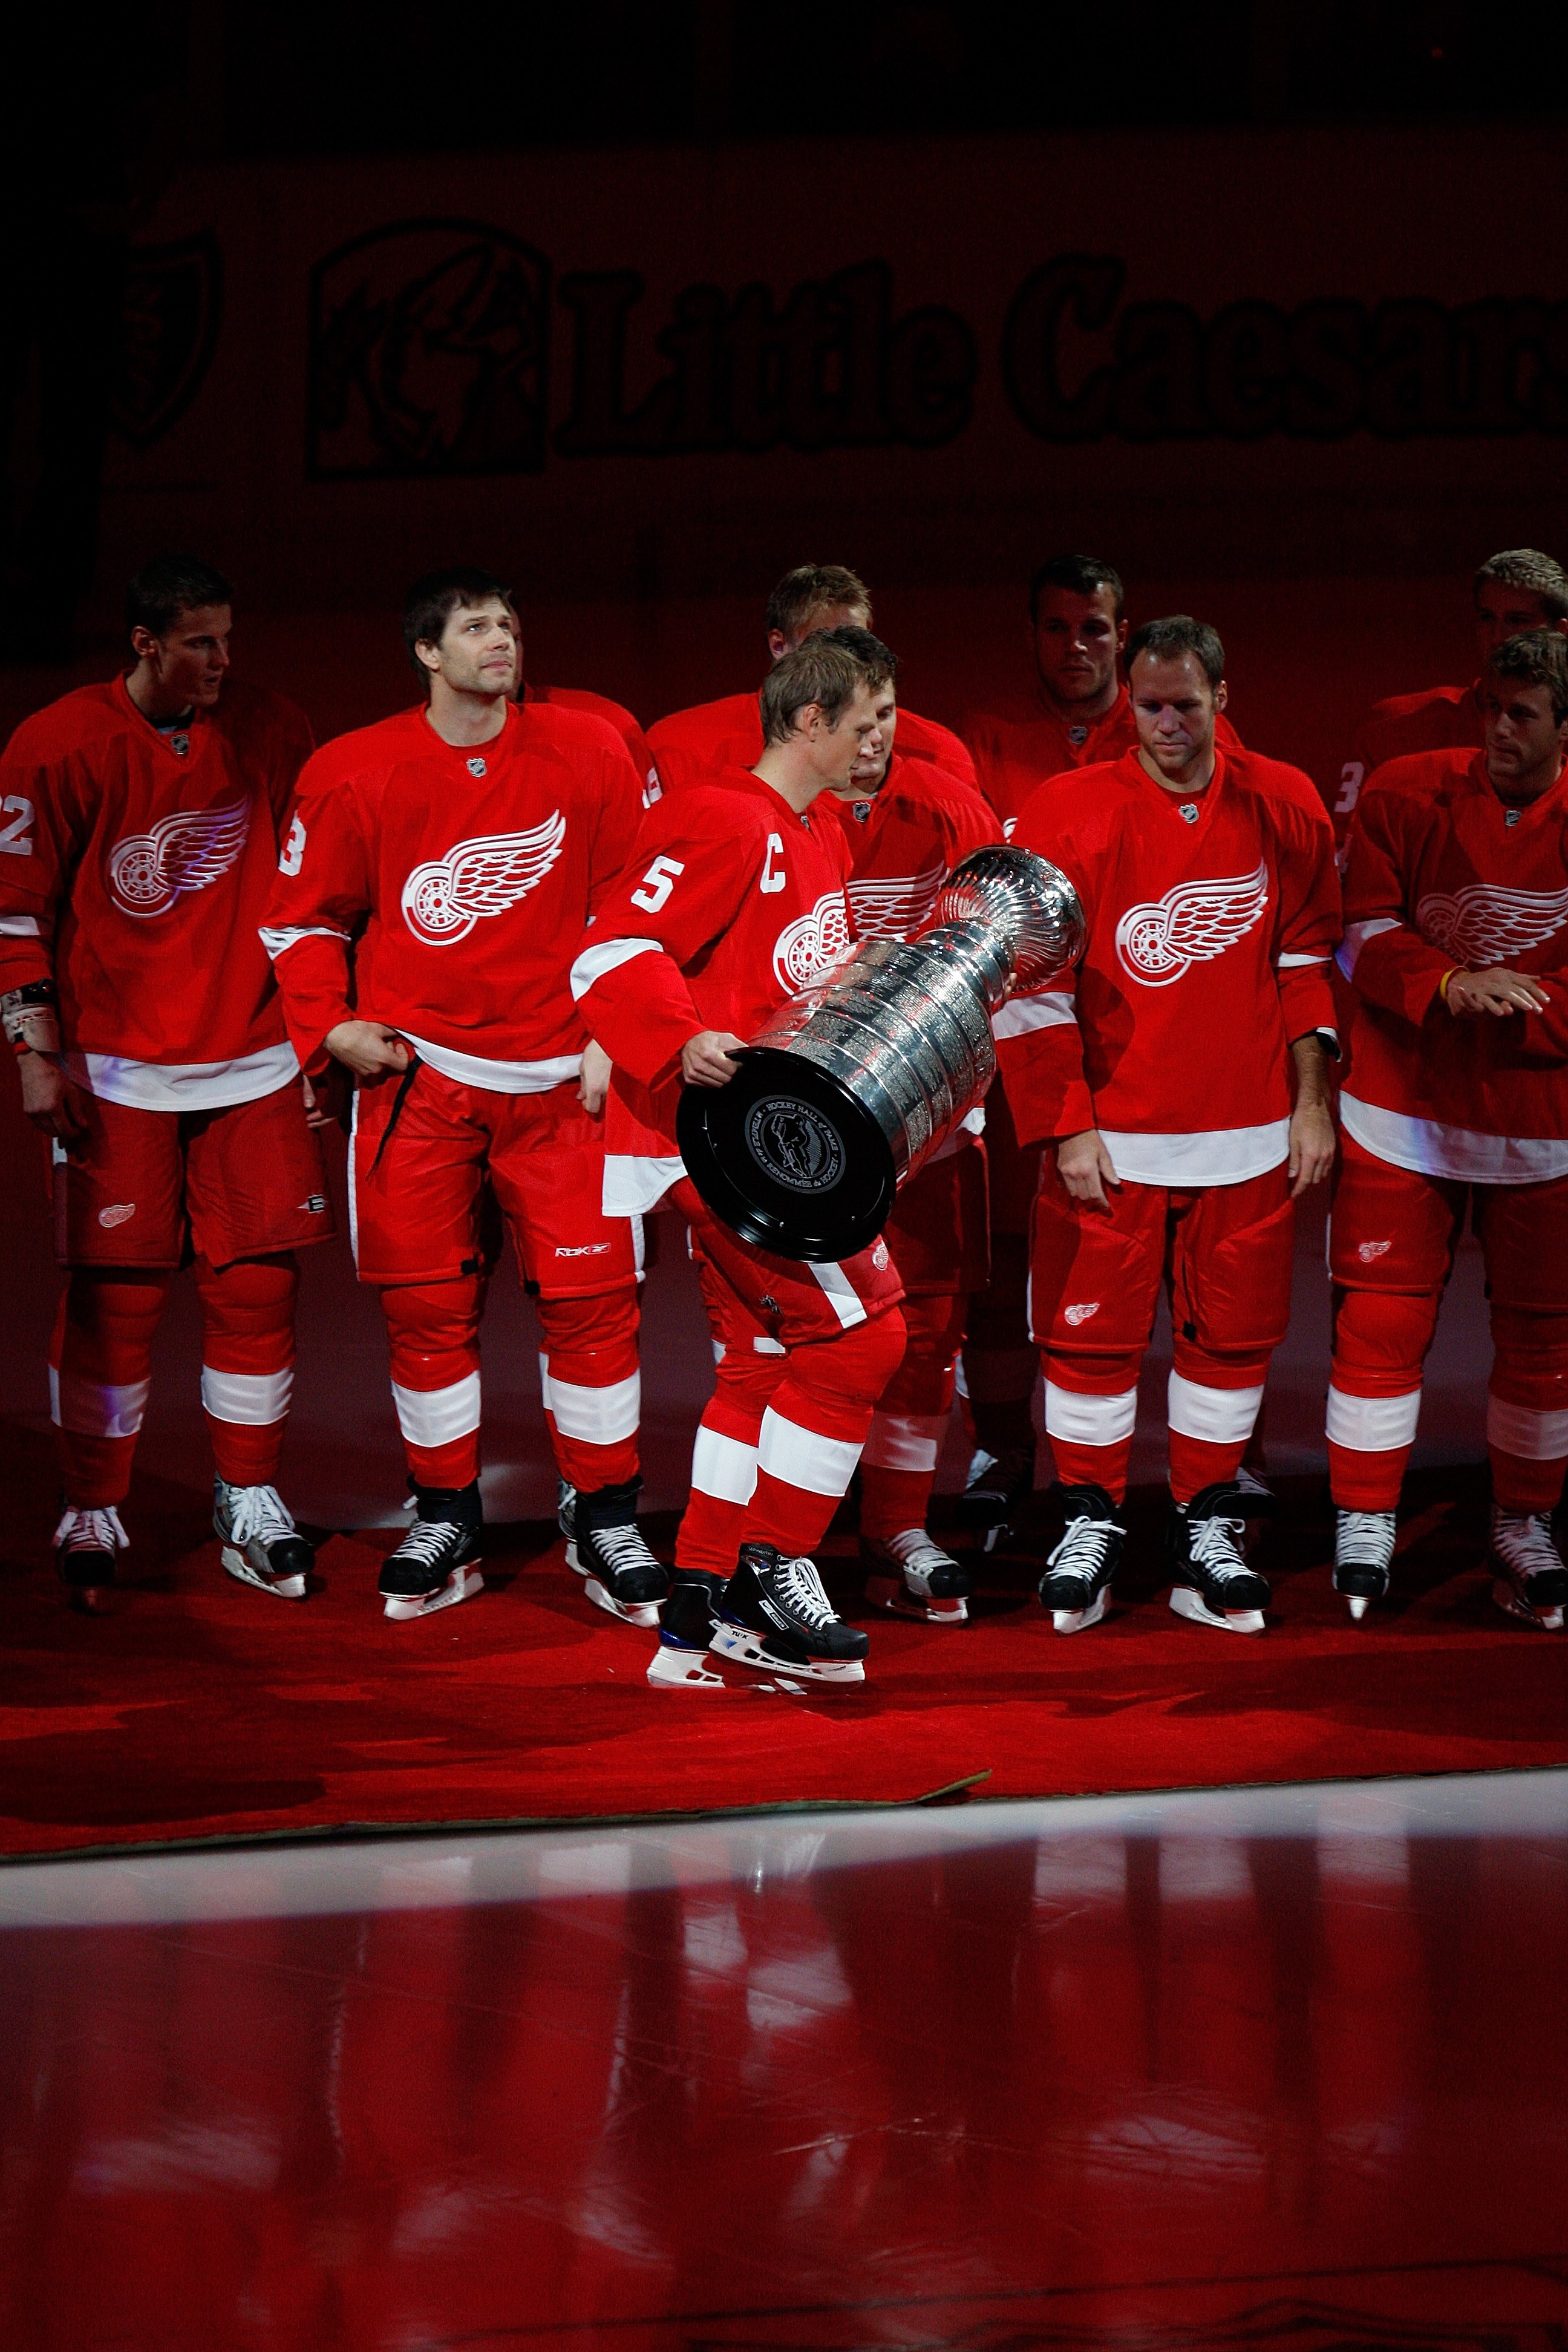 Greatest Uniforms in Sports, No. 7: Detroit Red Wings